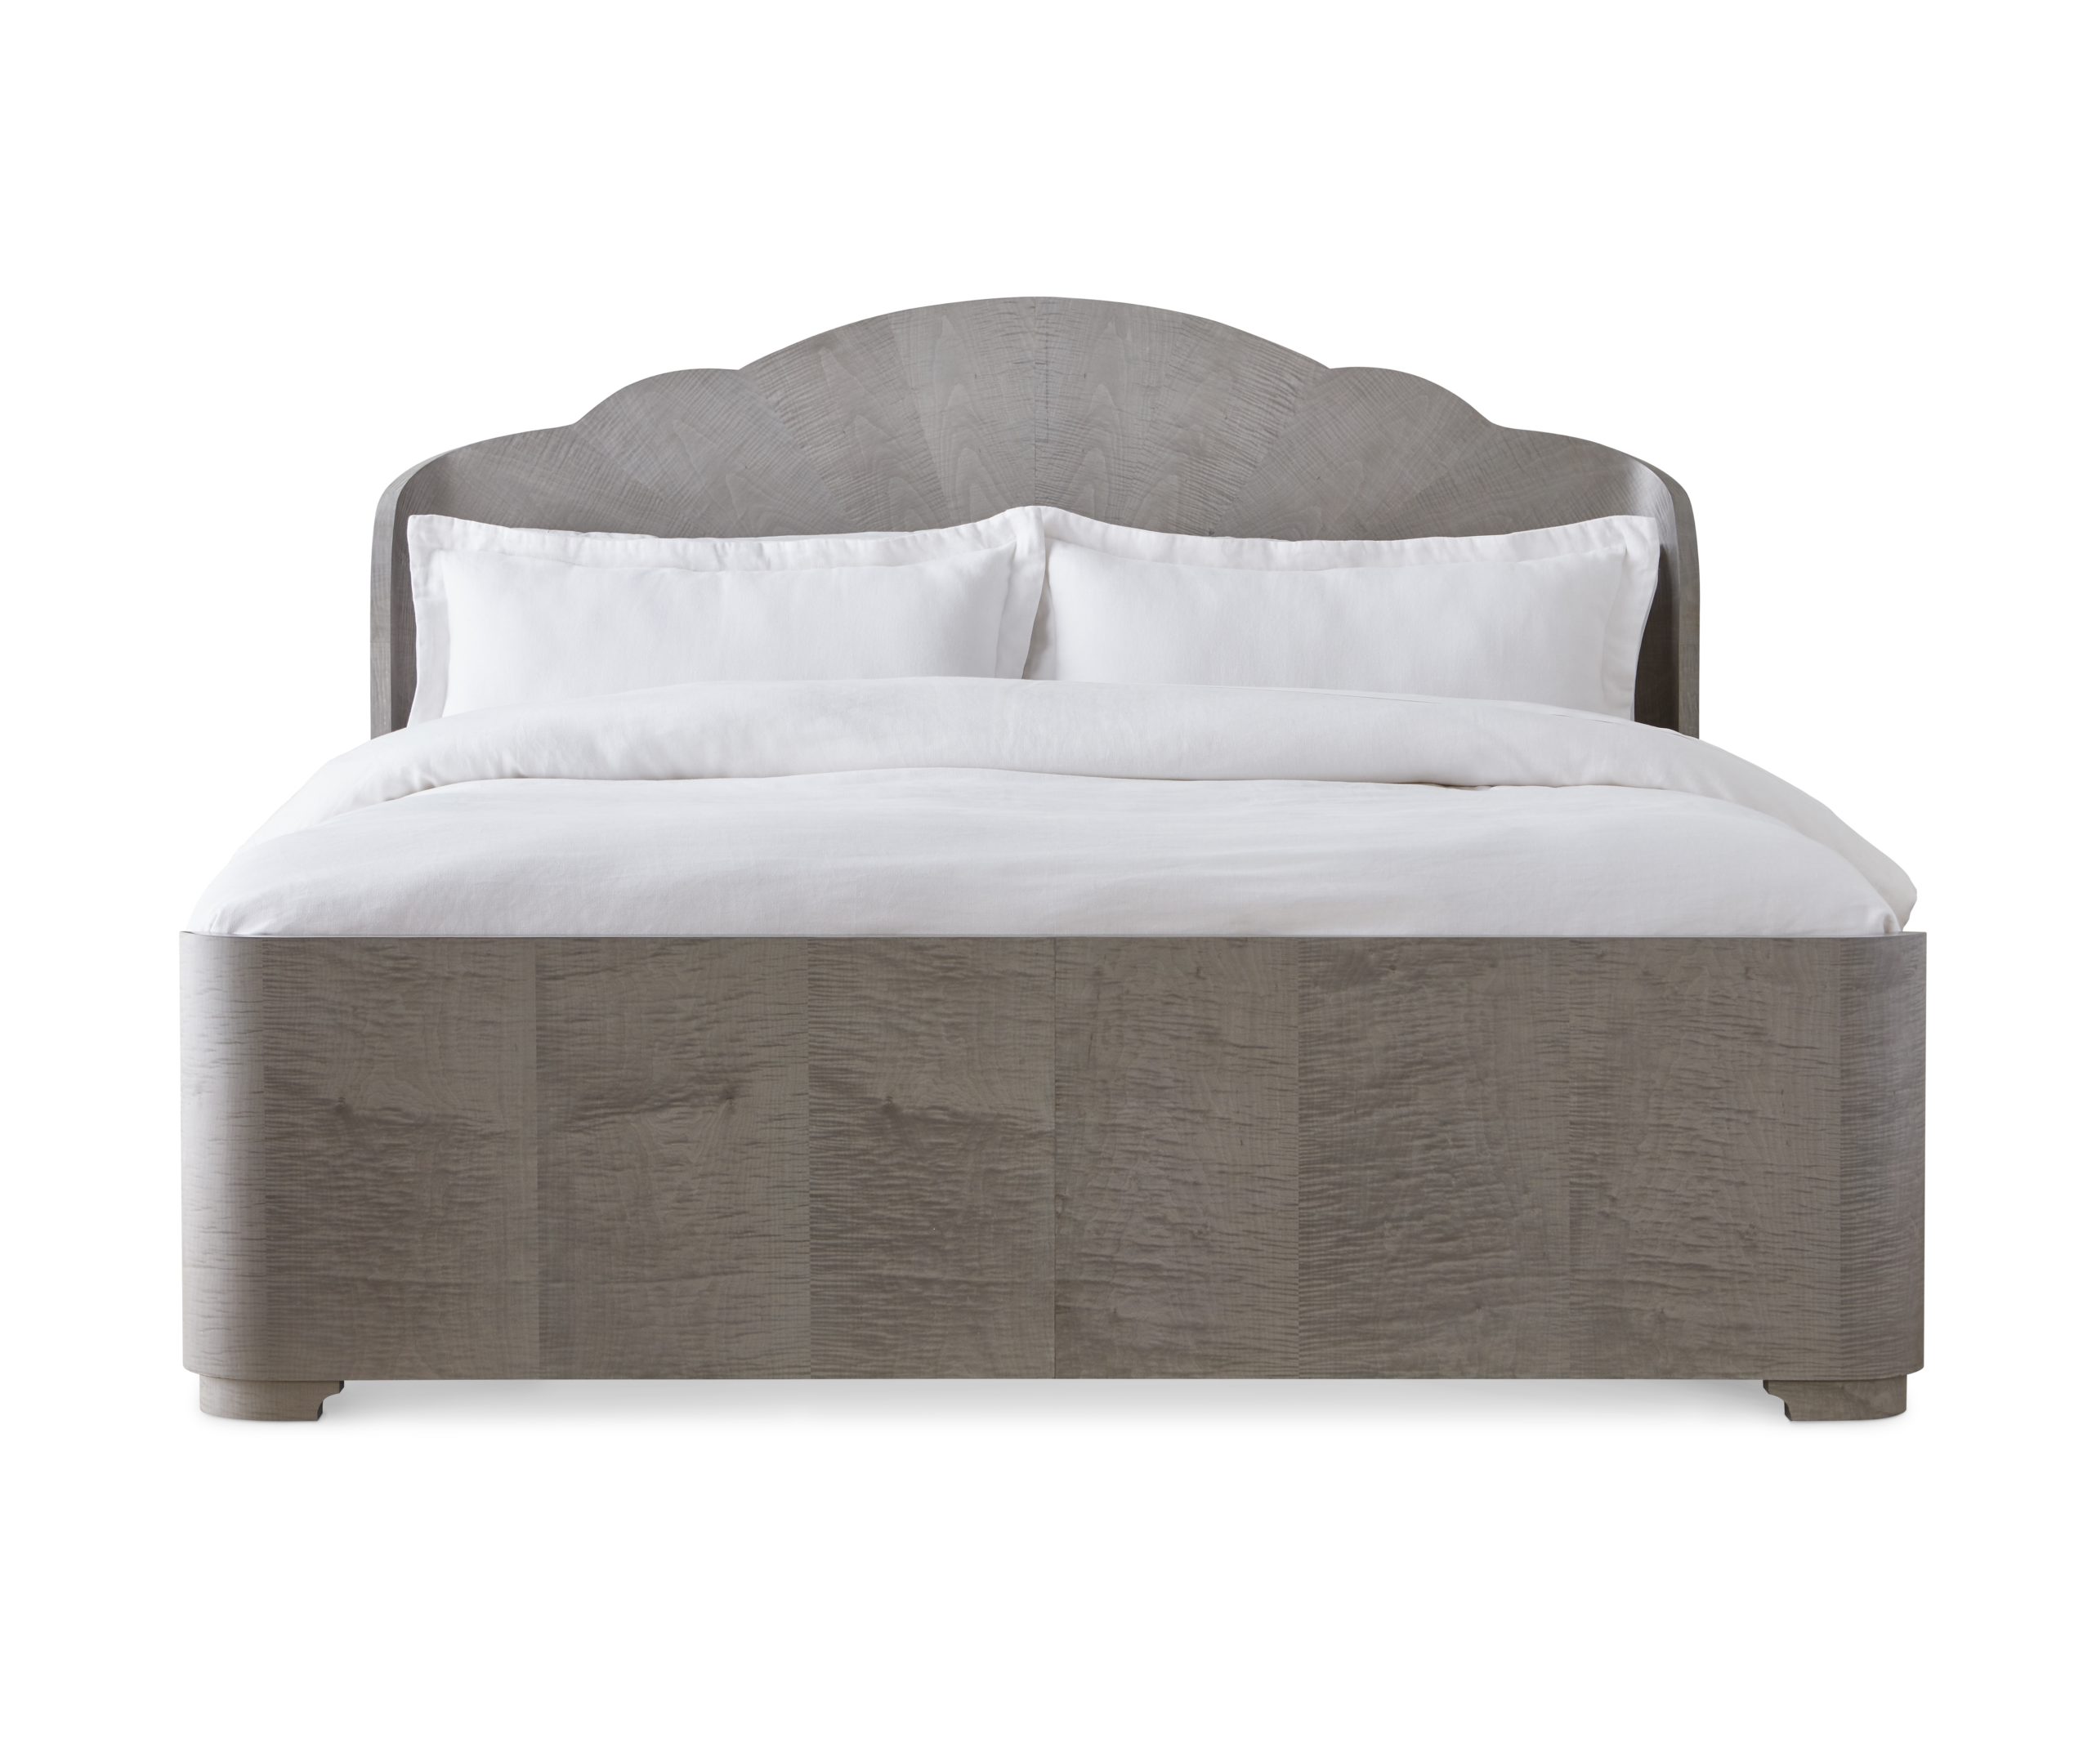 Baker_products_WNWN_adriana_bed_BAA3220_FRONT-scaled-2